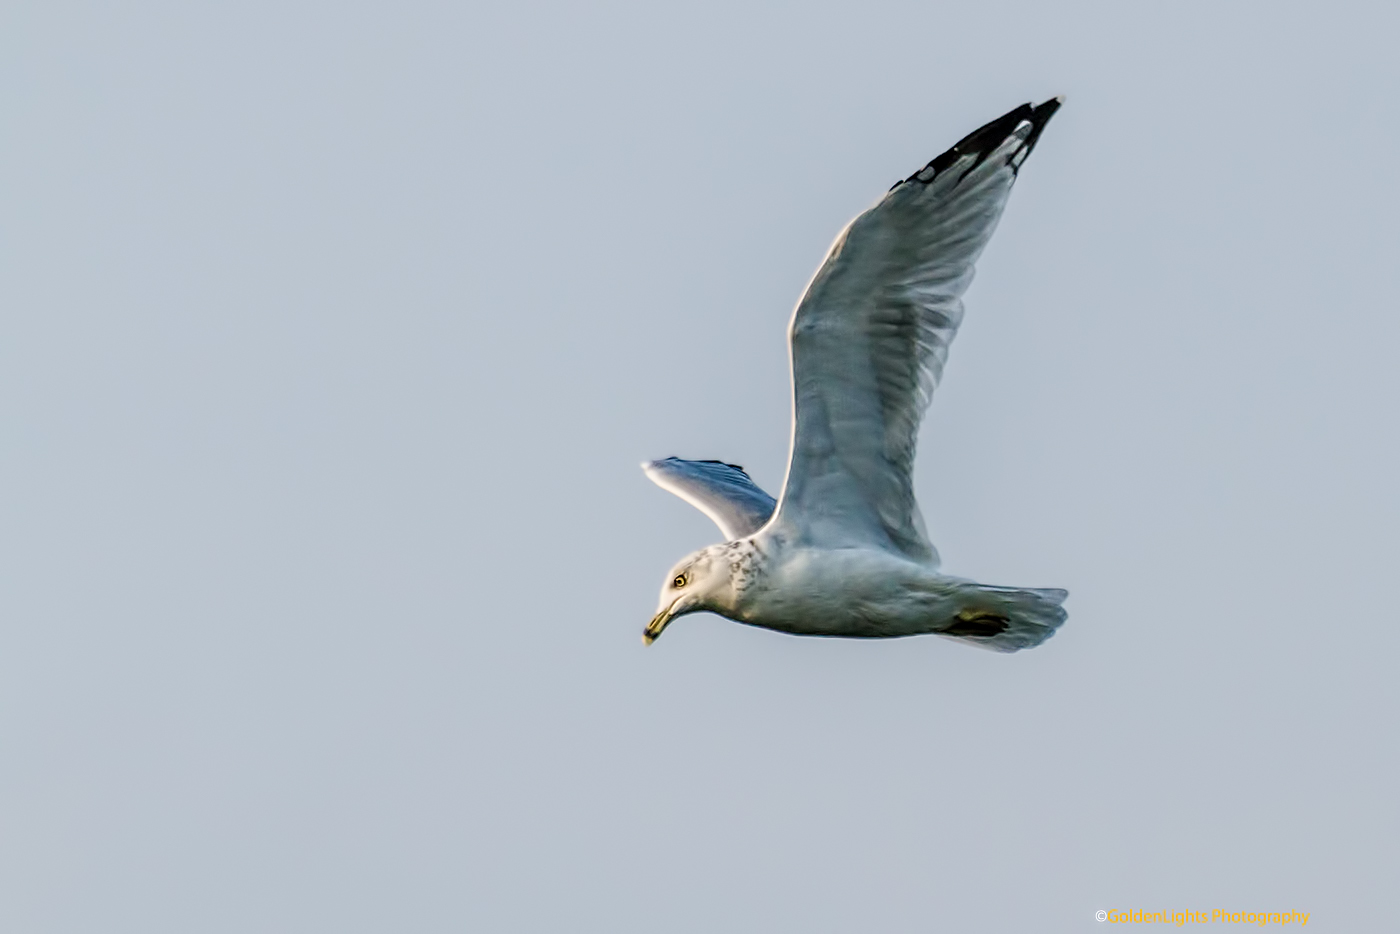 See What I See: The flying seagull and great egret 飞翔的海鸥和大白鹭